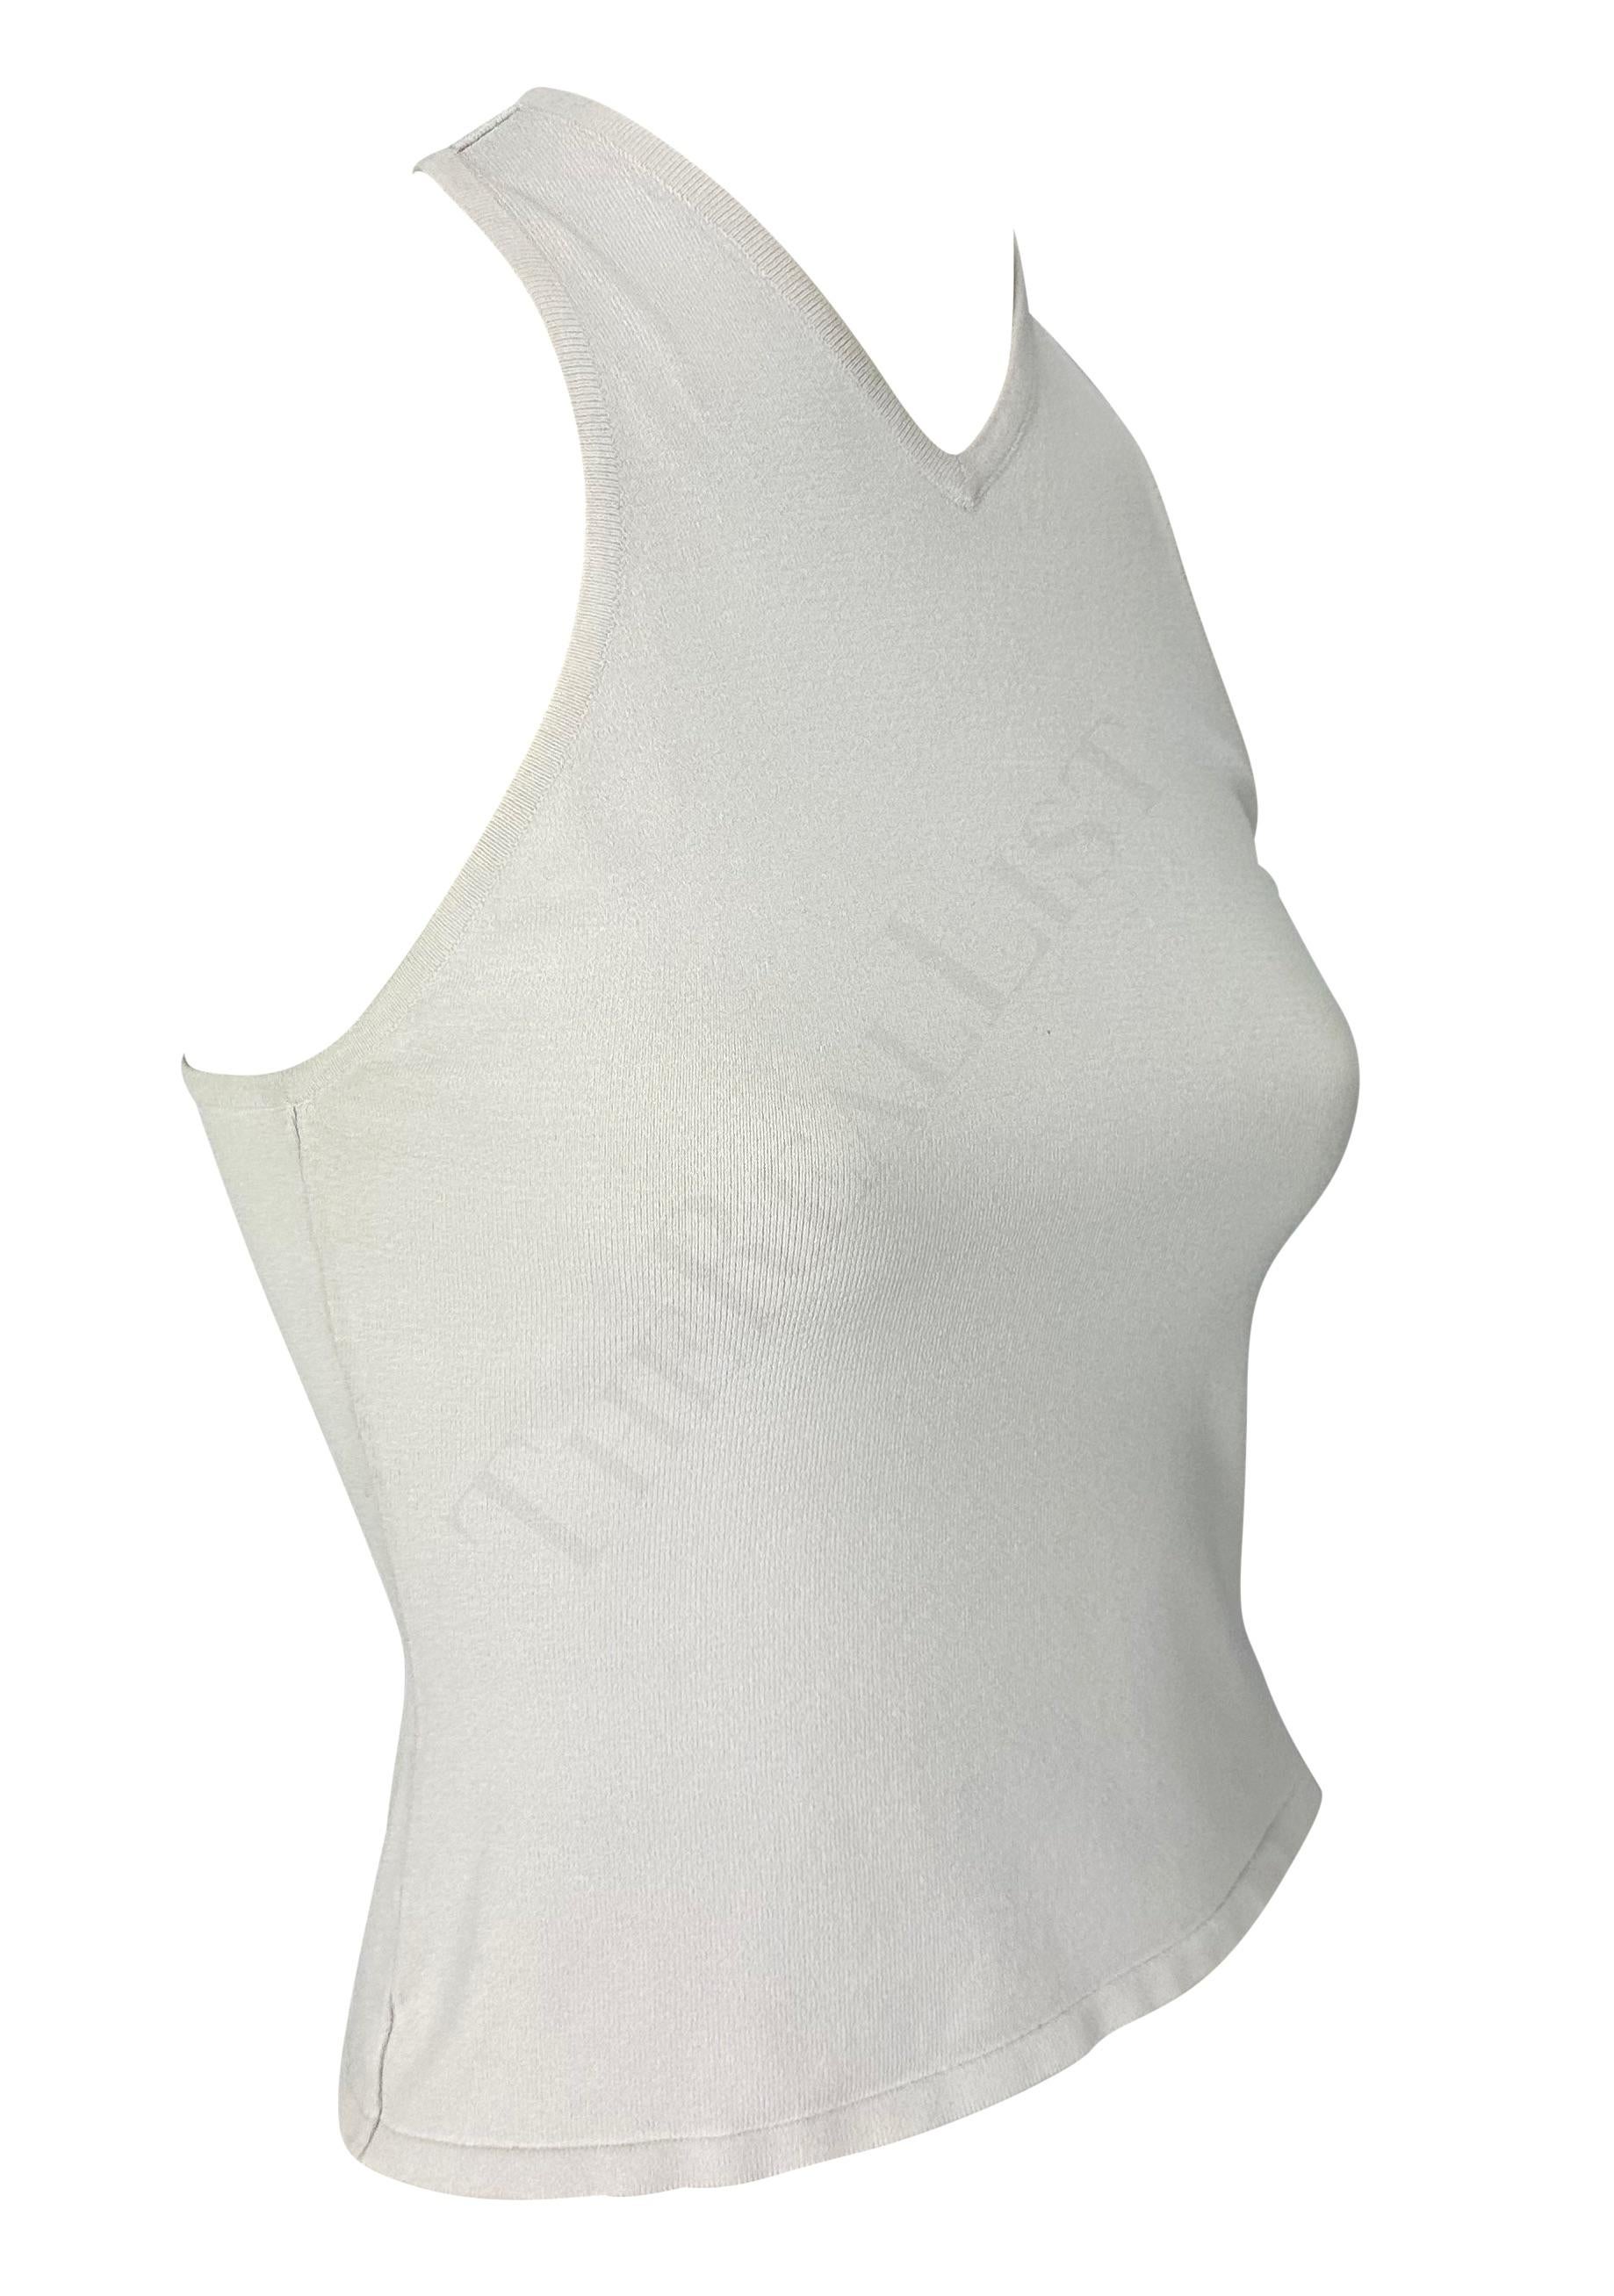 S/S 1998 Gucci by Tom Ford White Stretch Knit Racerback Tank Top In Good Condition In West Hollywood, CA